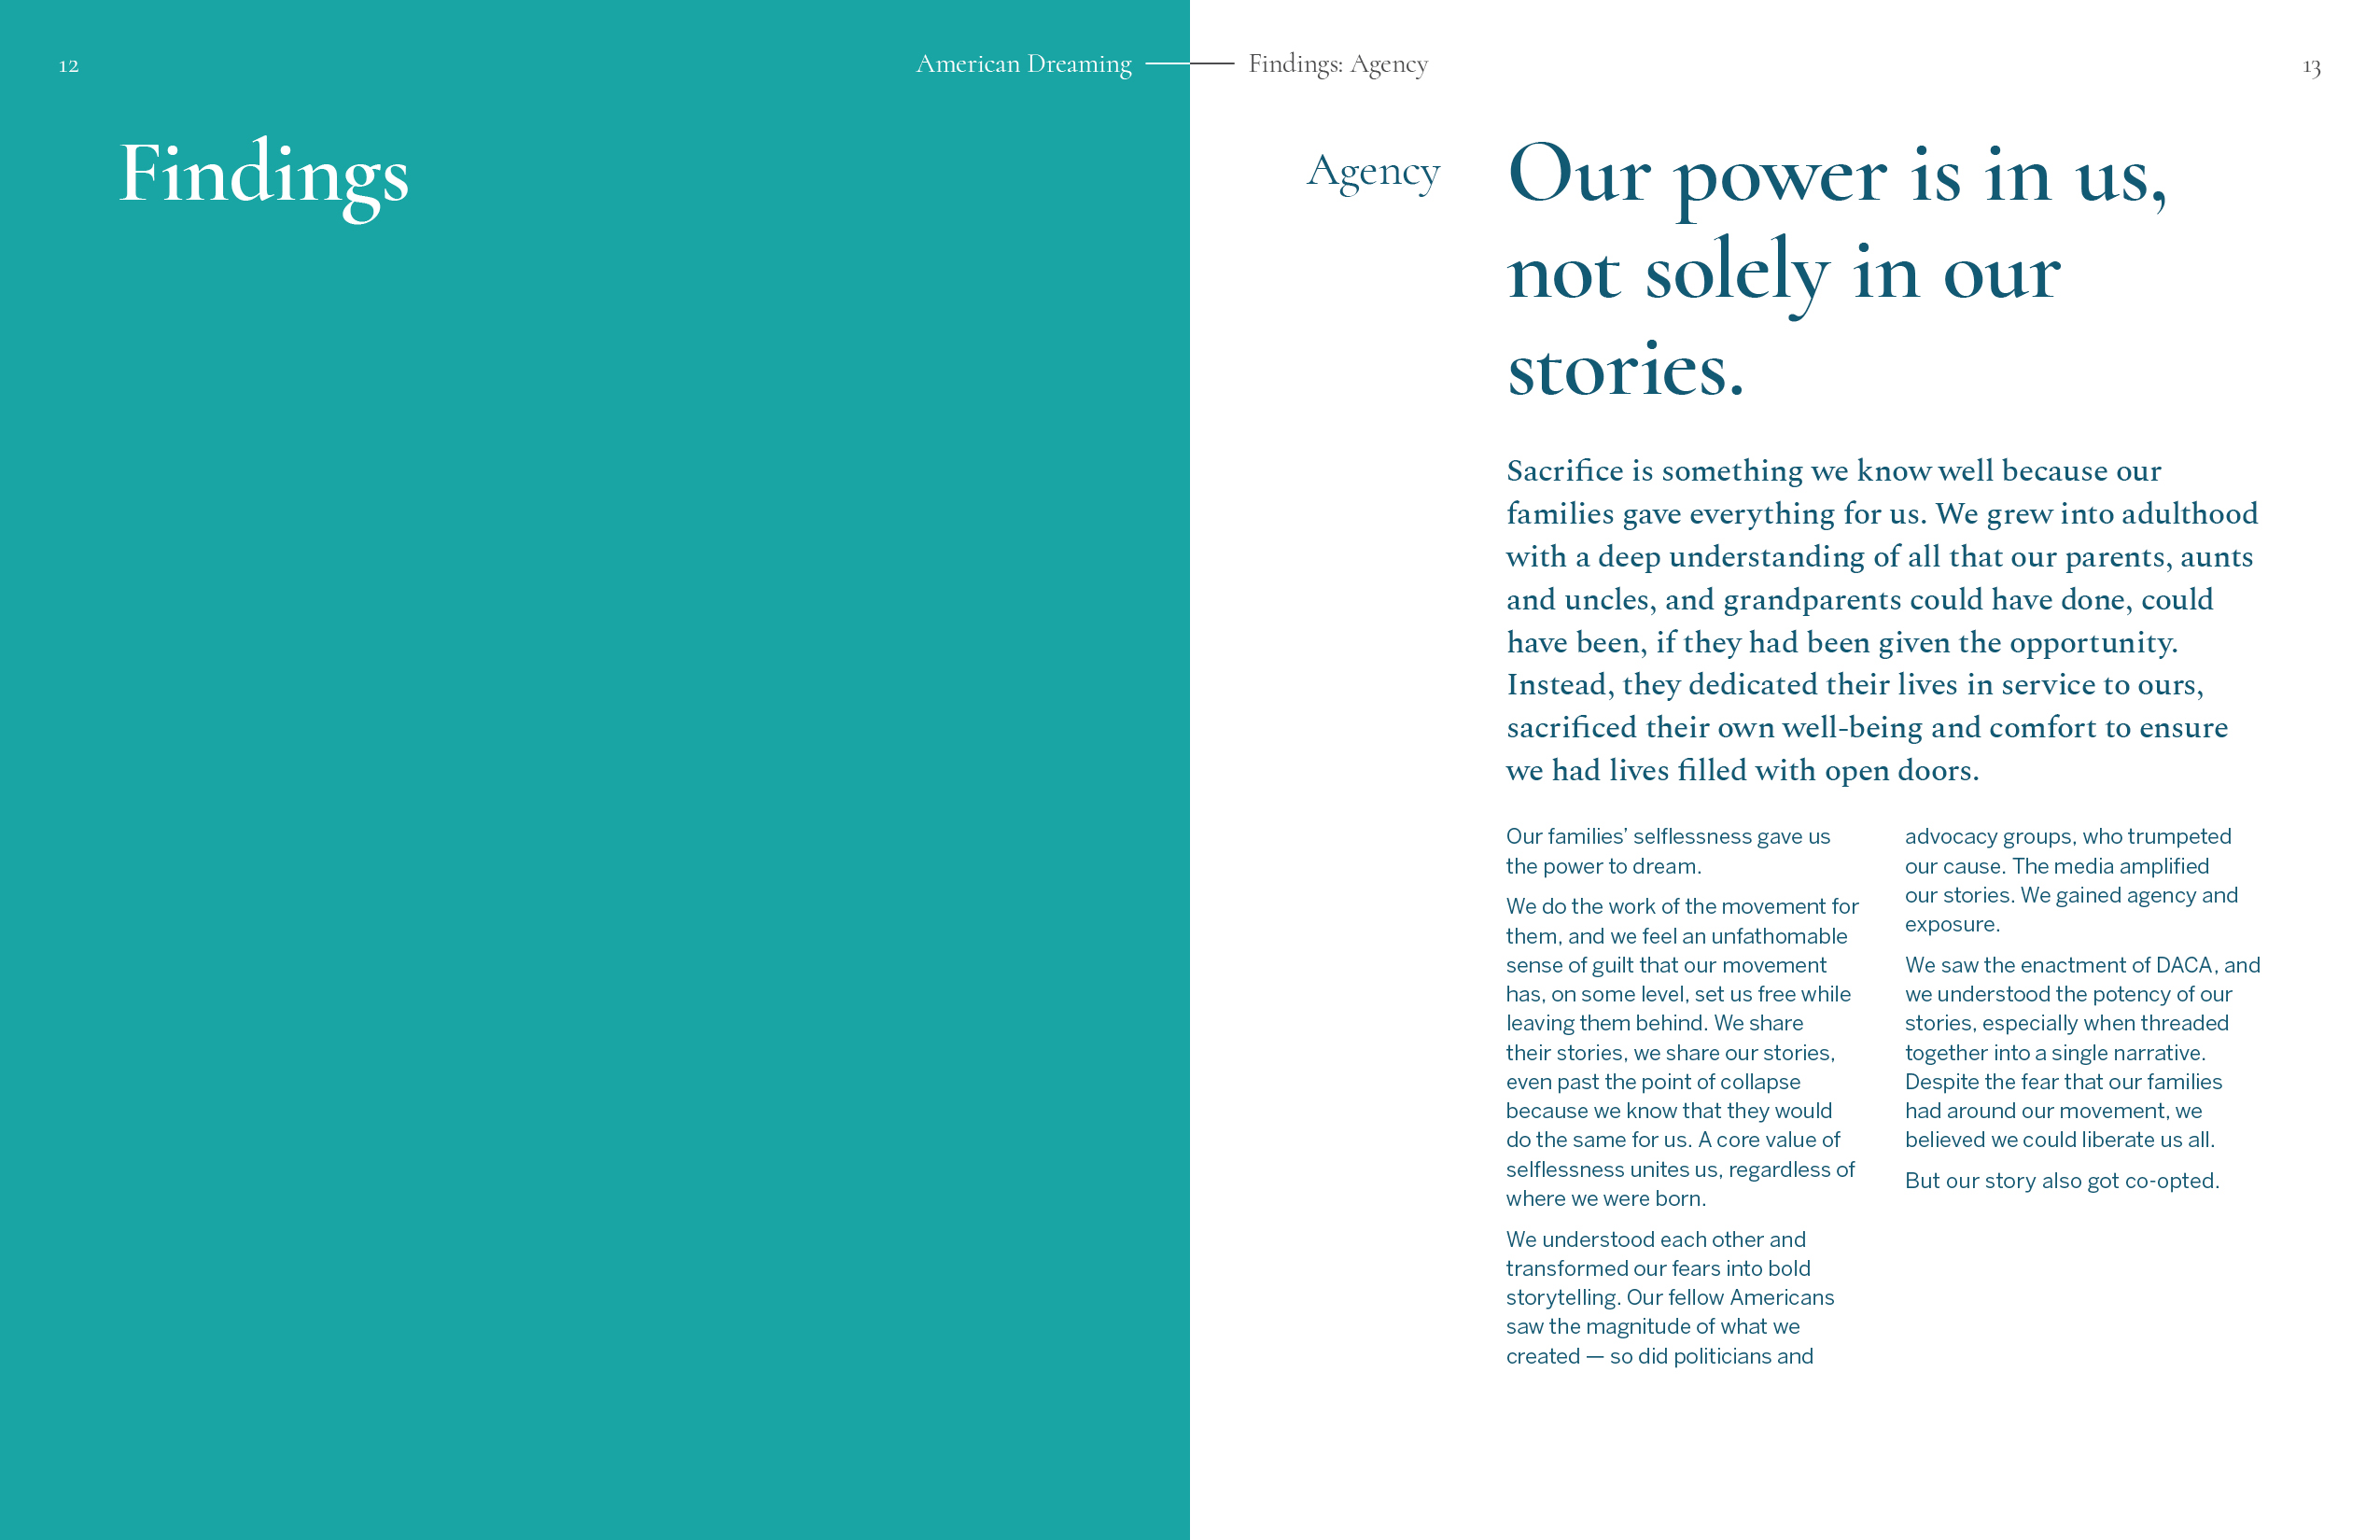 A typographic spread of the report, elaborating on Agency: Our power is in us, not solely in our stories.